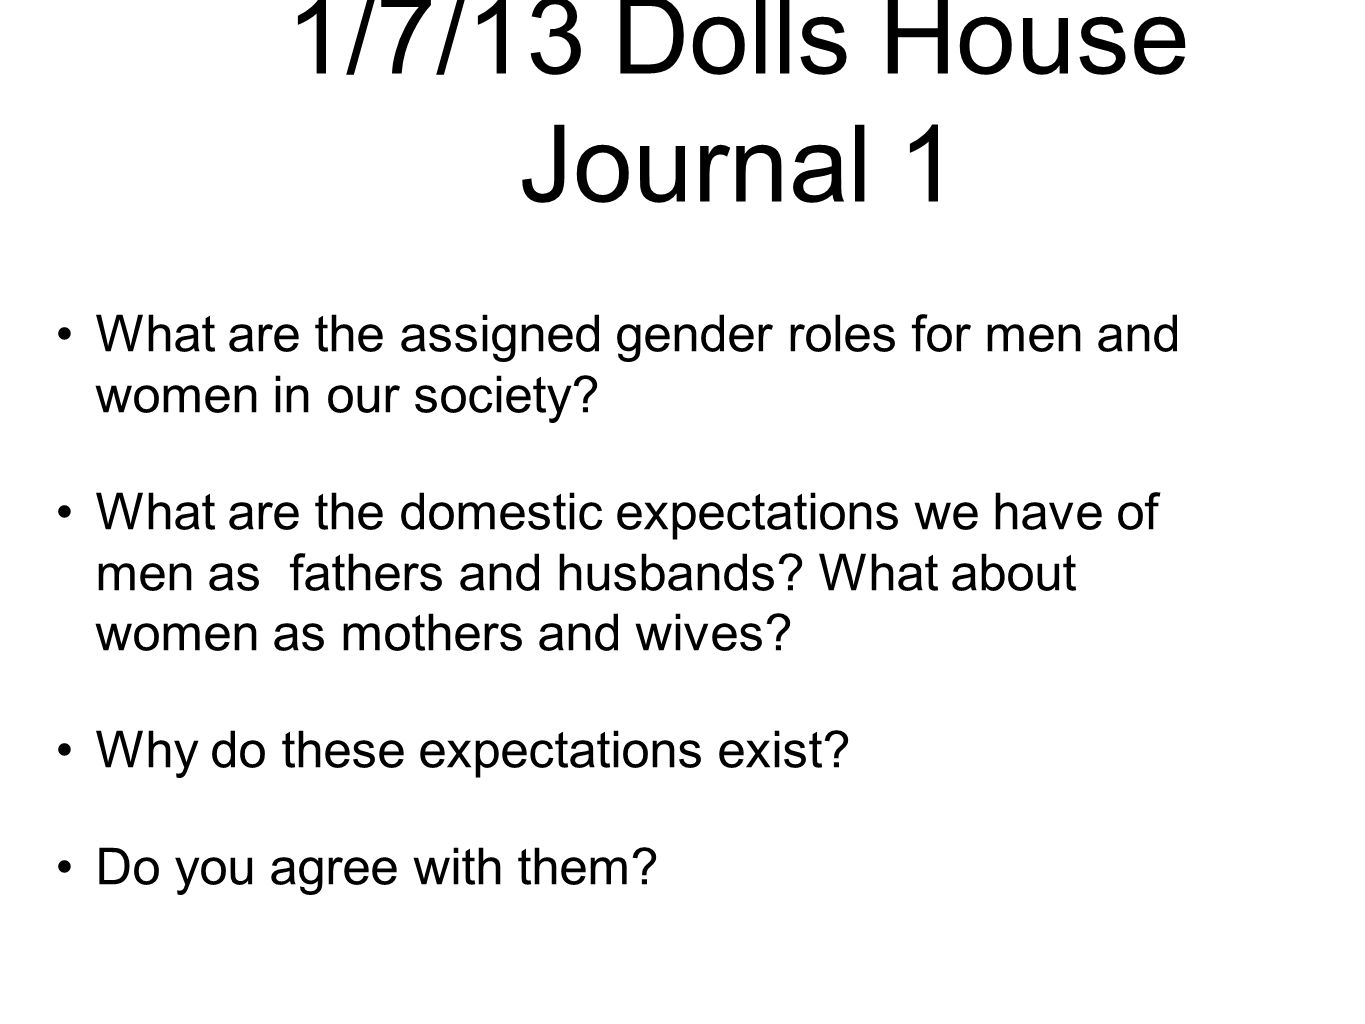 gender roles in a dolls house